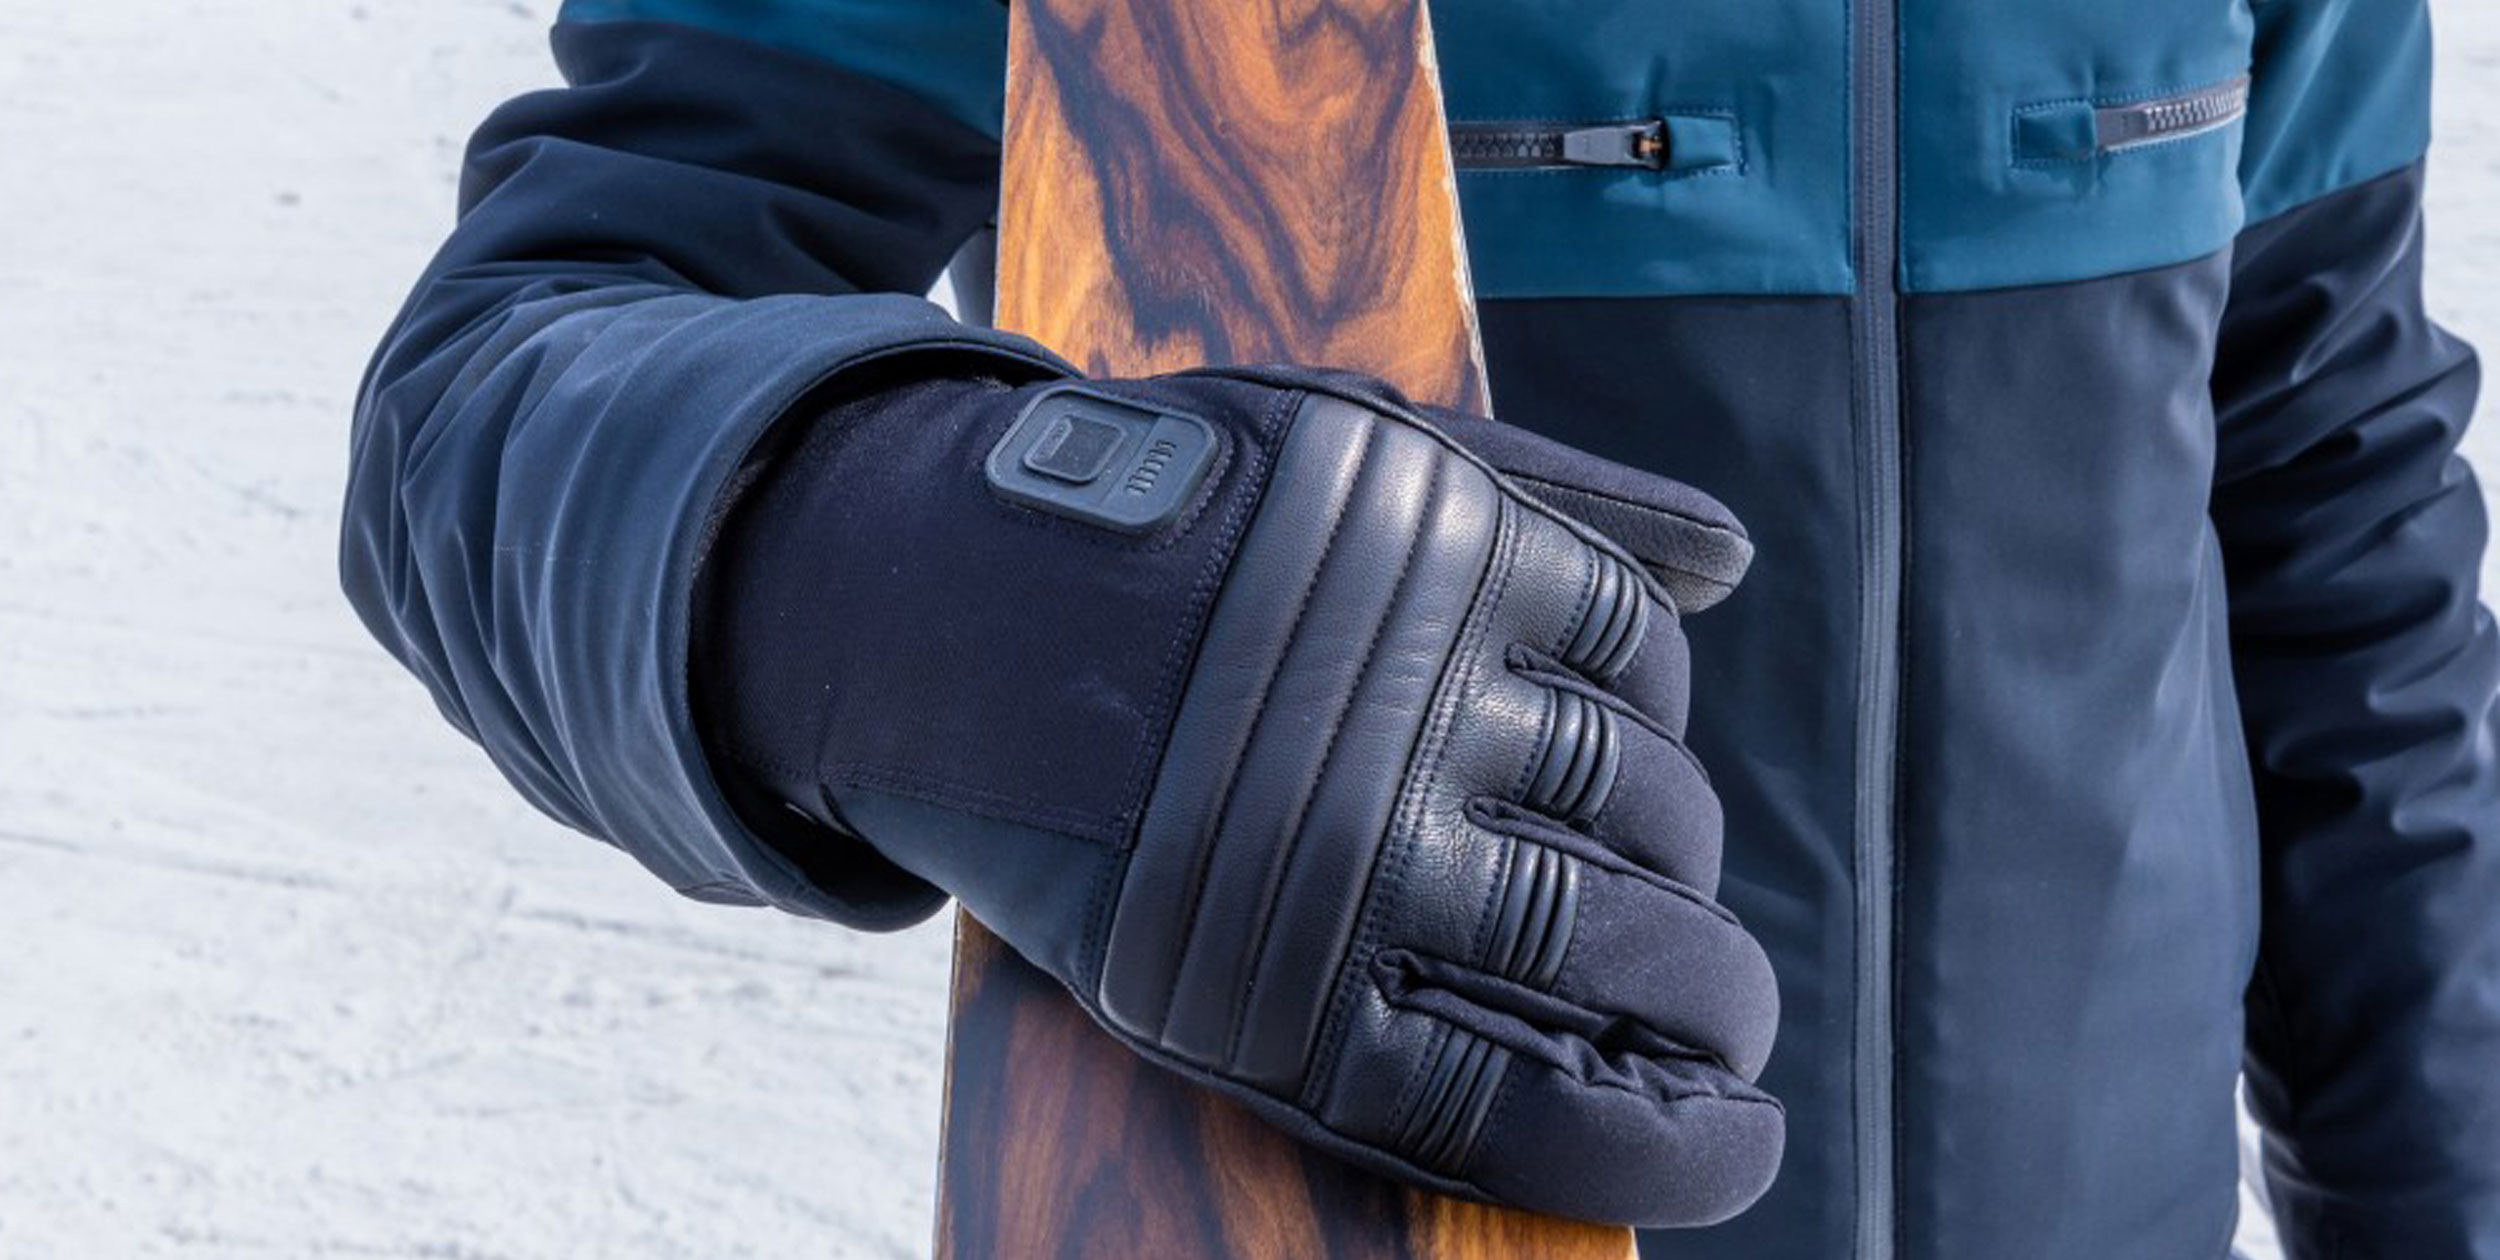 Racer Connectic 5 heated gloves